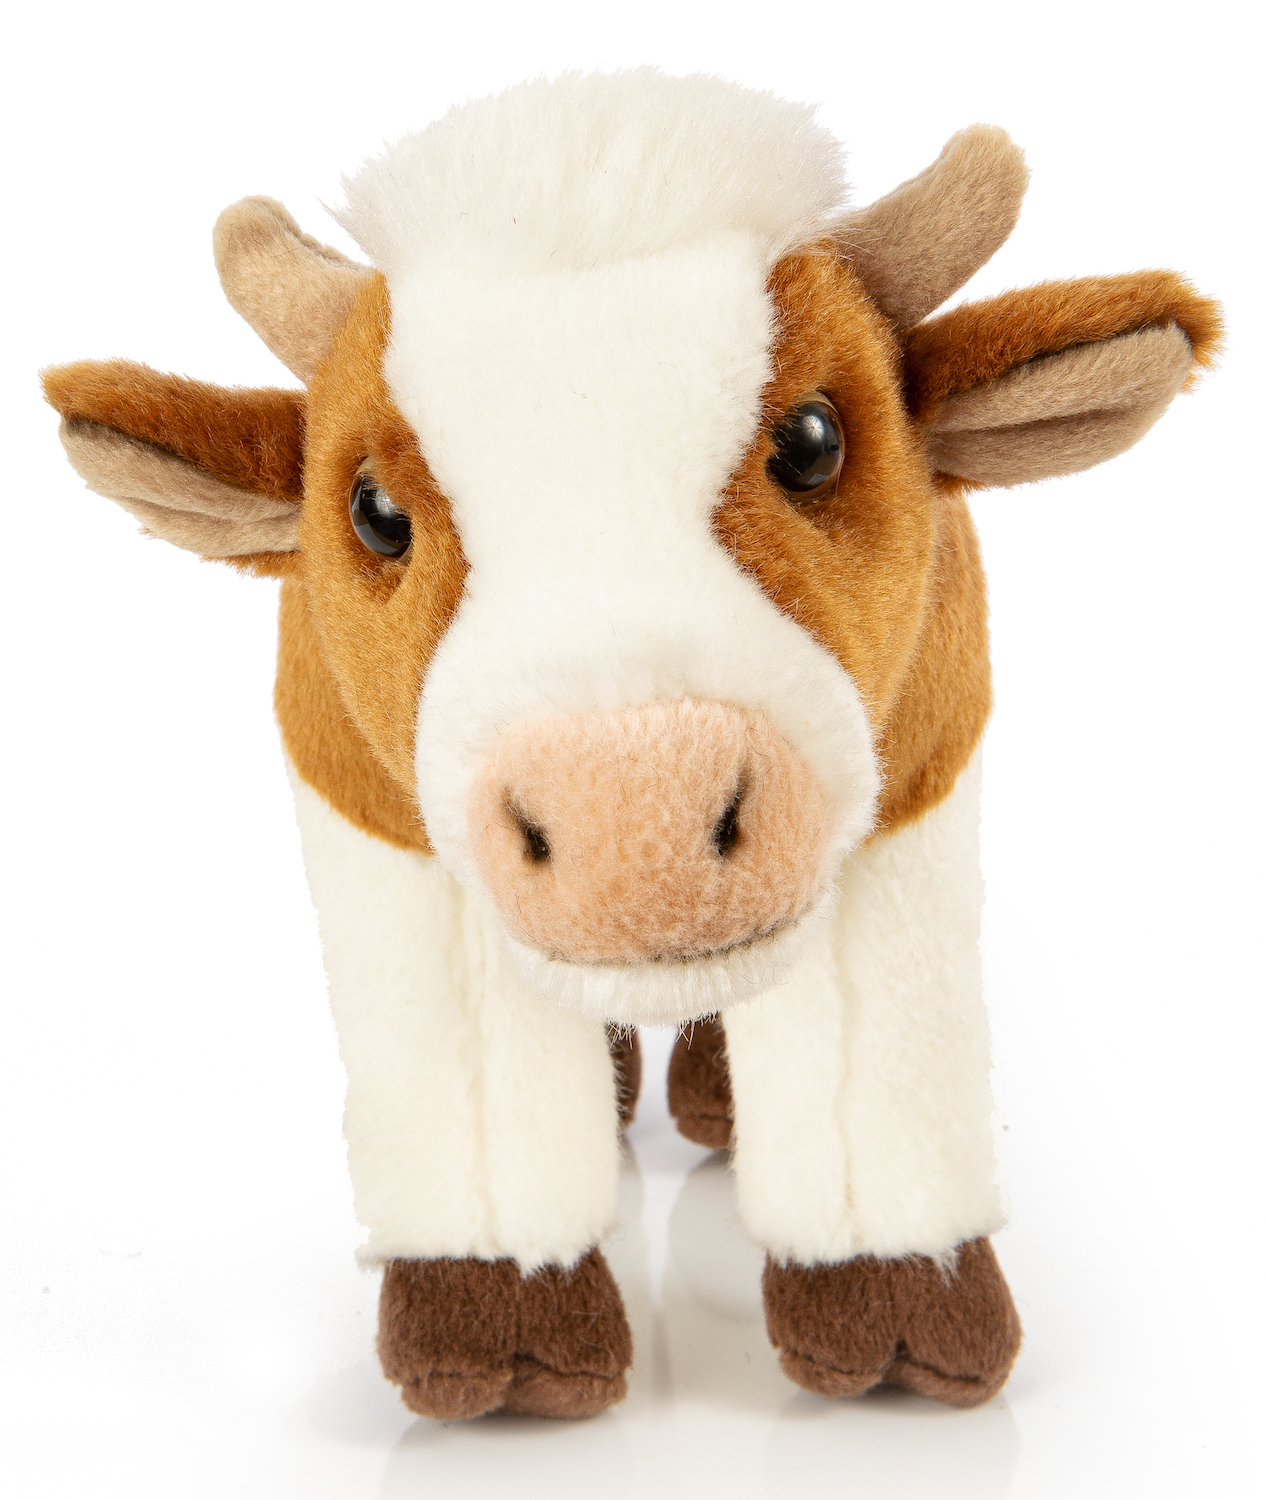 Cow white-brown, standing - 27 cm (length)